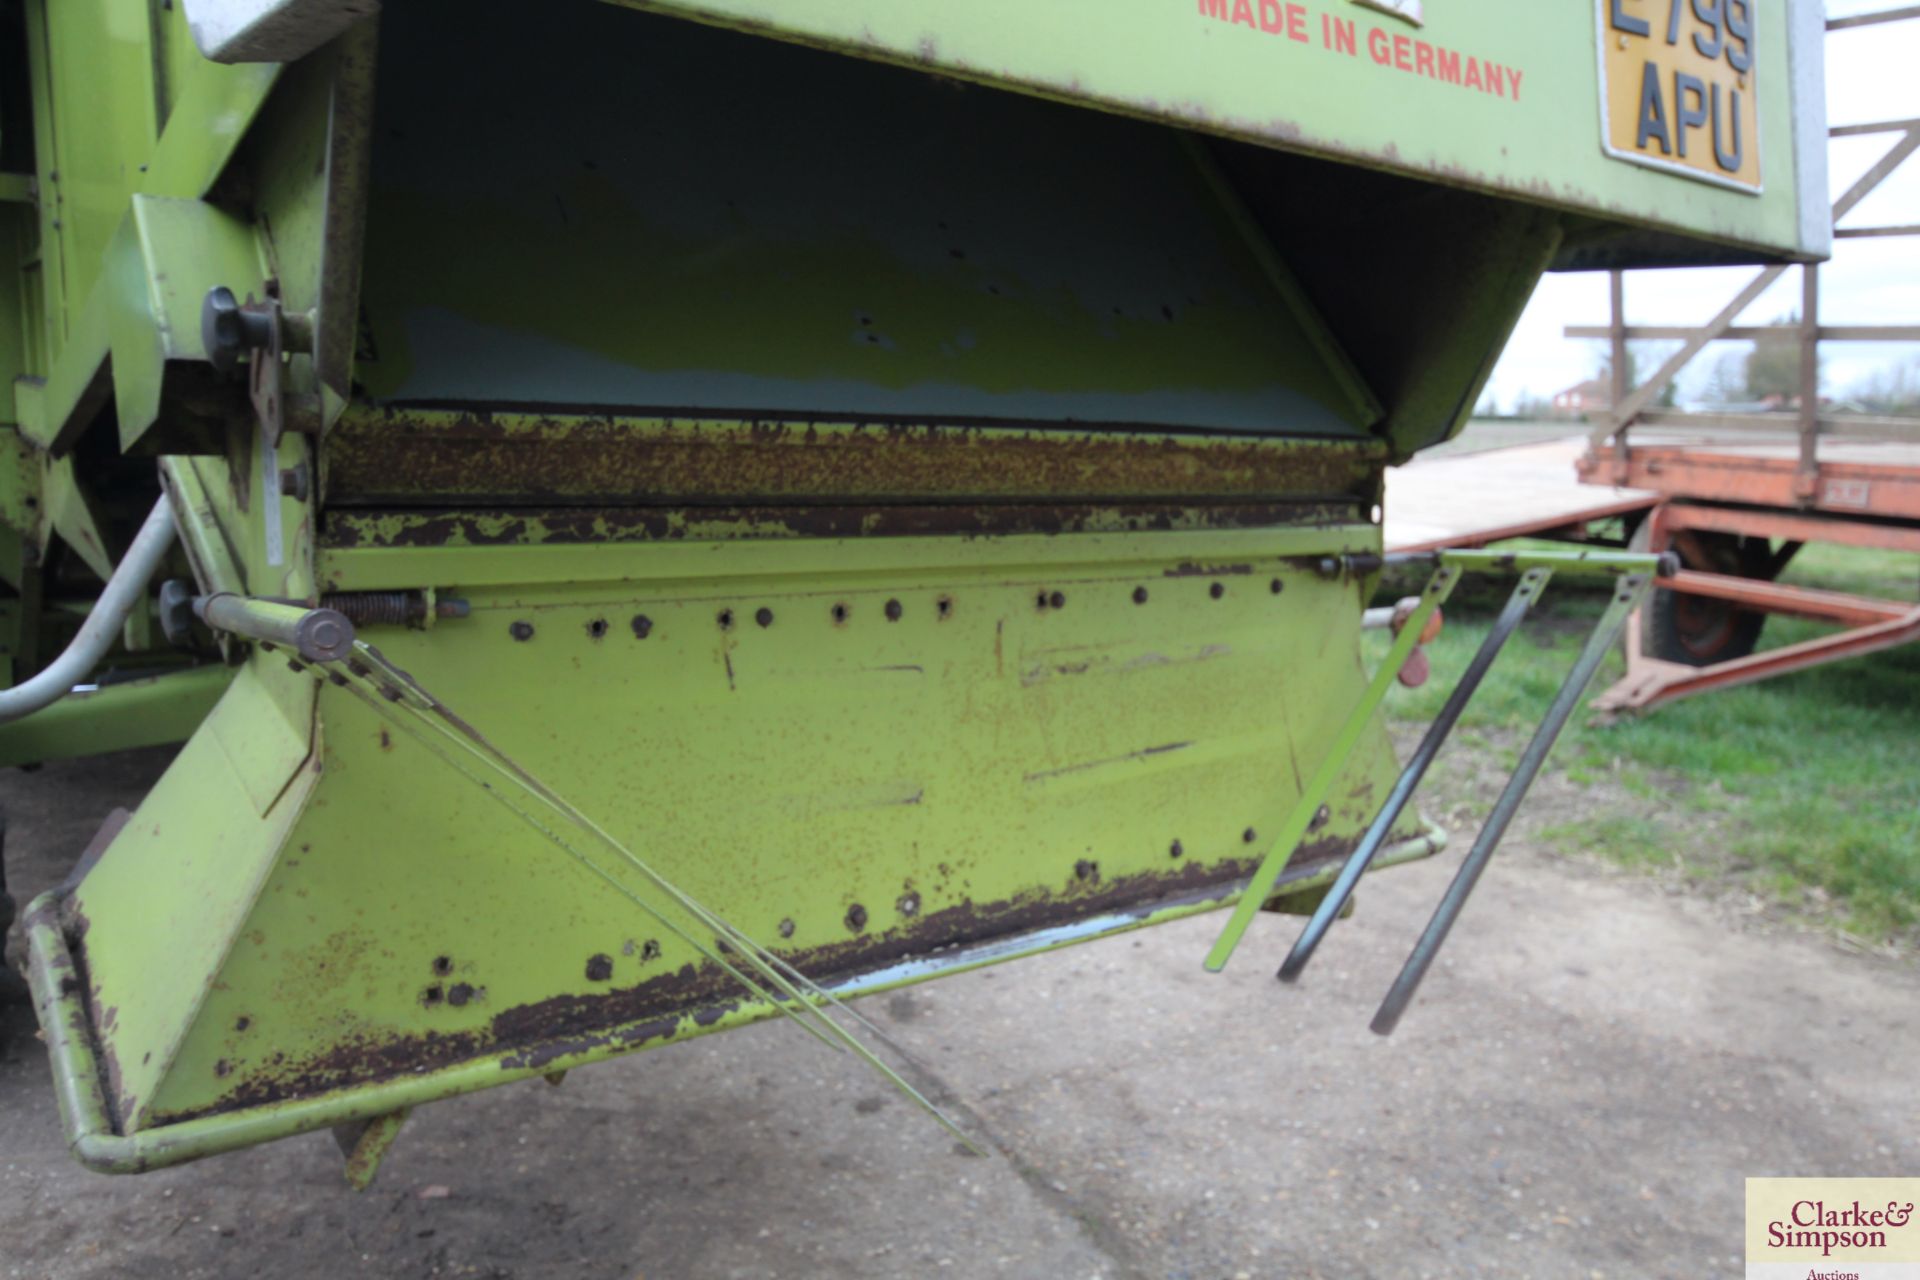 ** UPDATED HOURS ** Claas Dominator 98S combine. Registration E799 APU. Date of first registration - Image 30 of 120